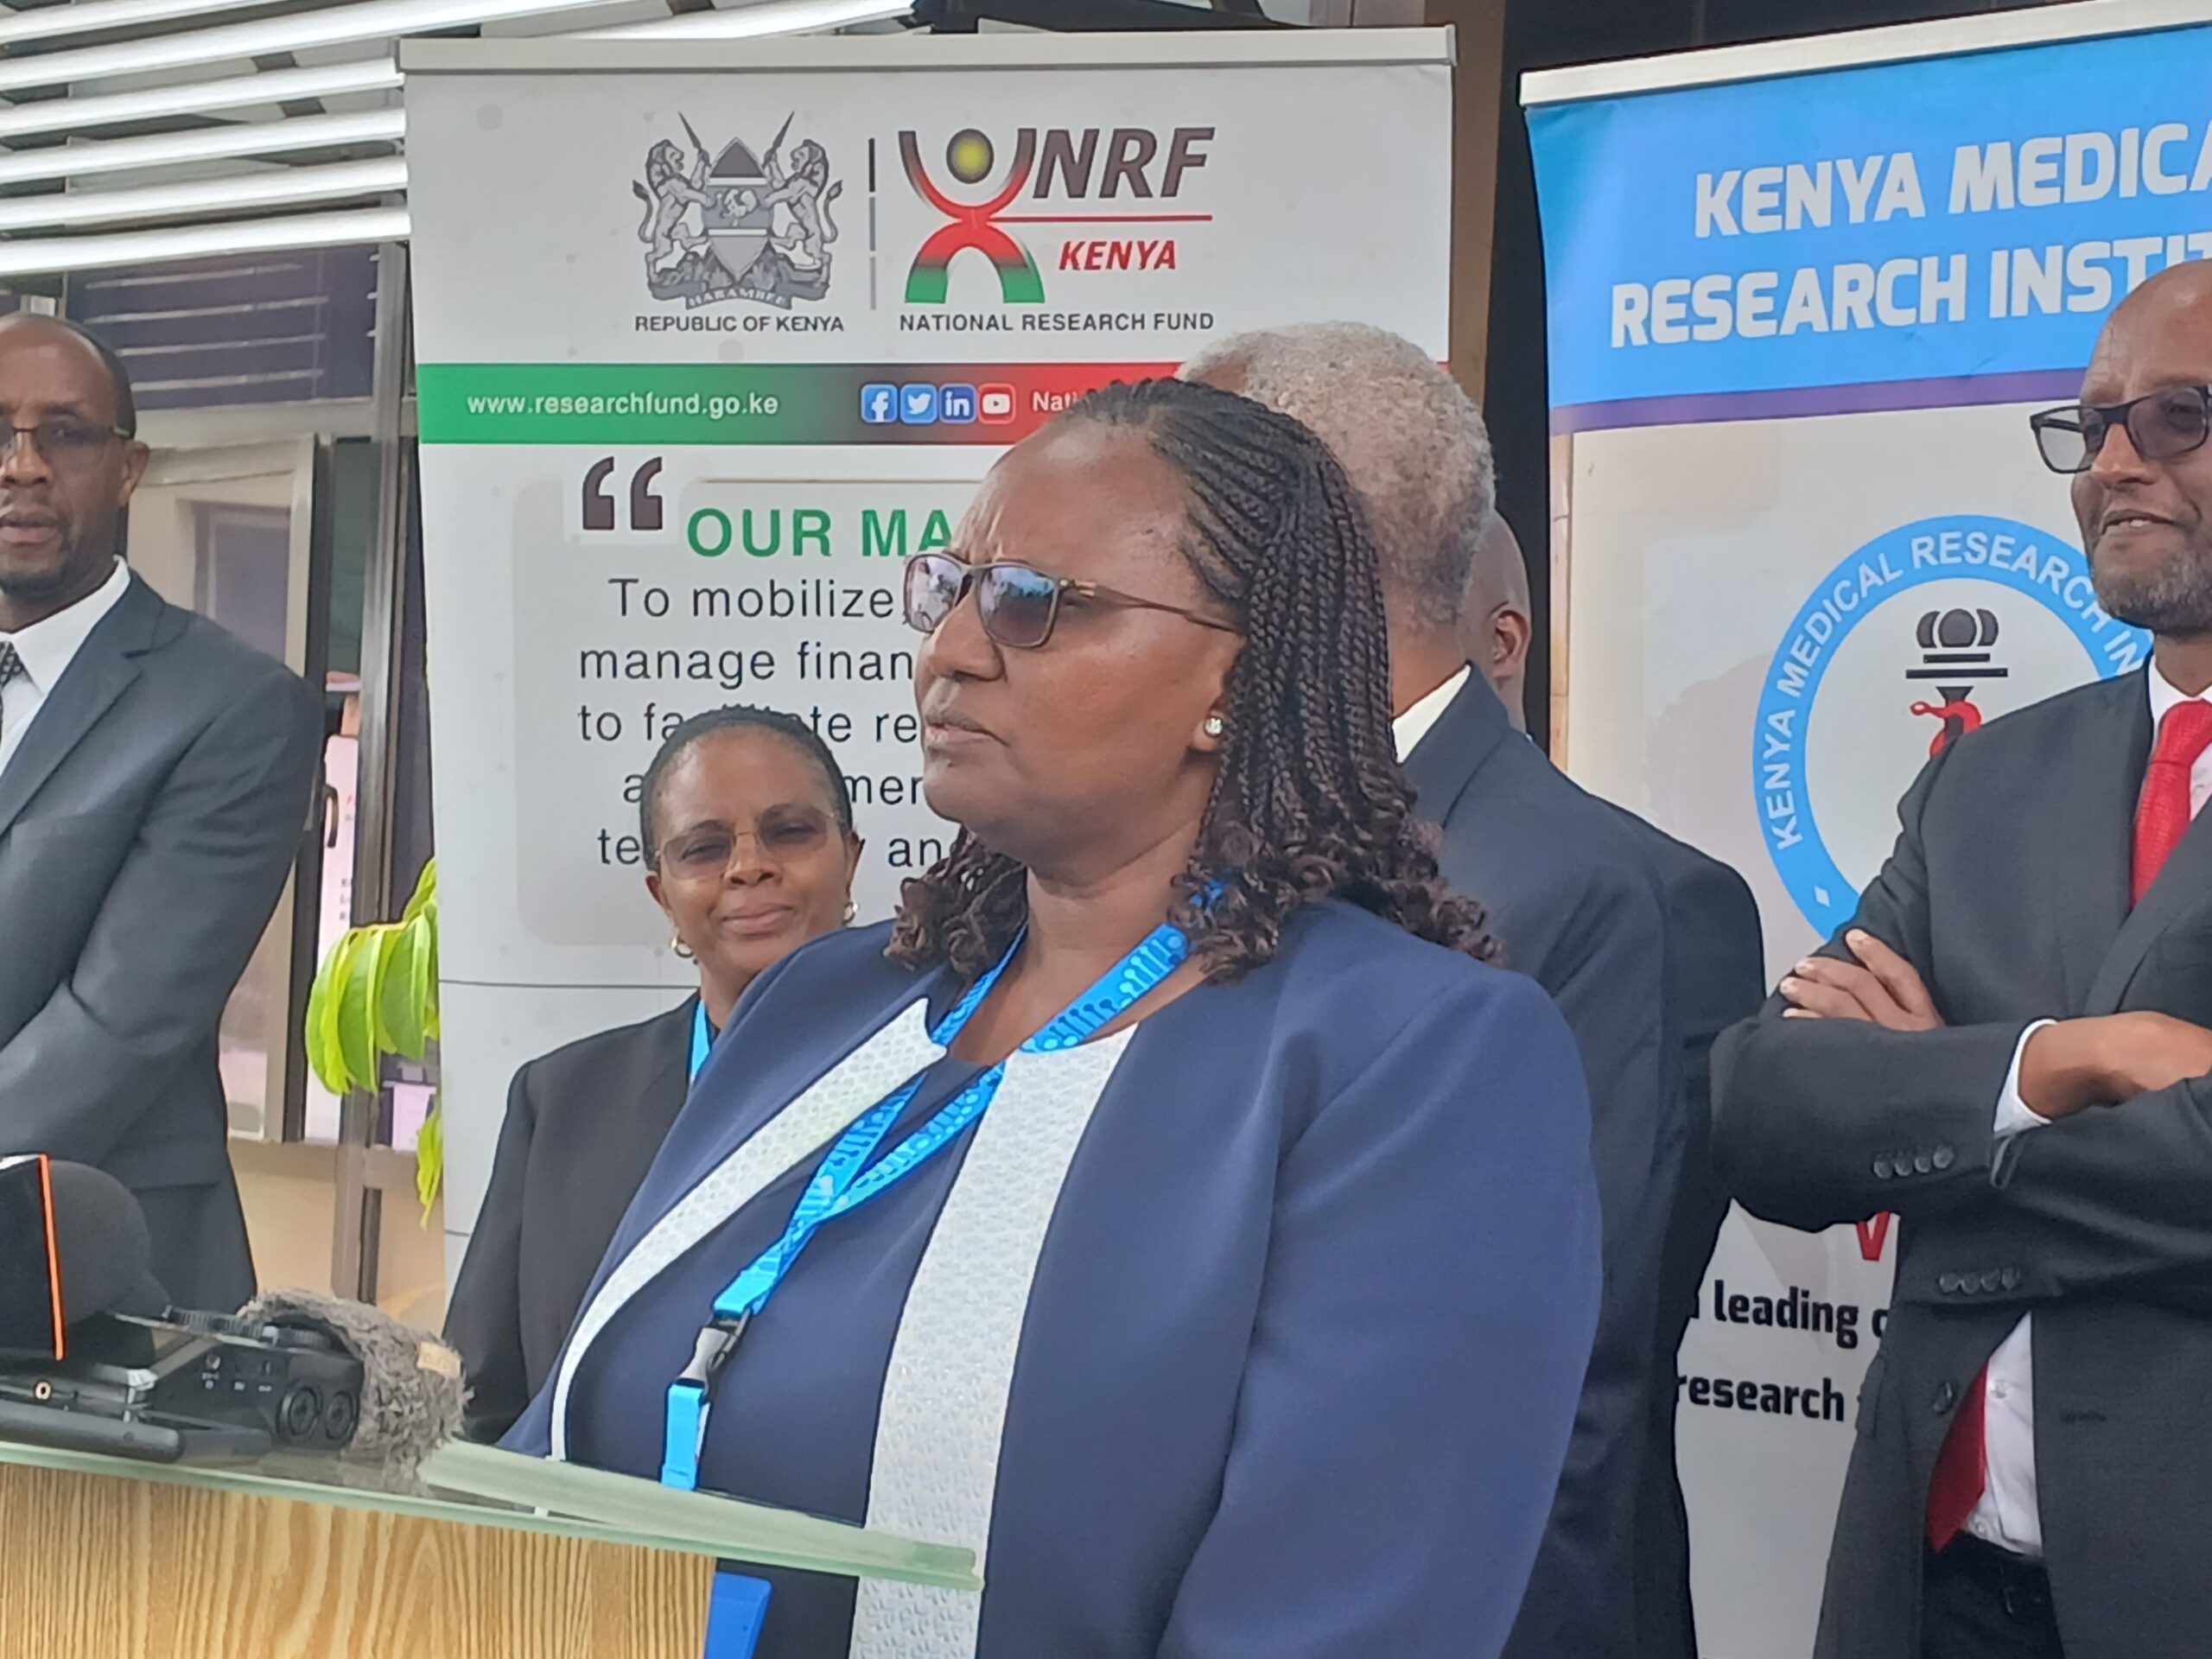 Kenya has commissioned the first stem cell research laboratory in sub-Saharan Africa